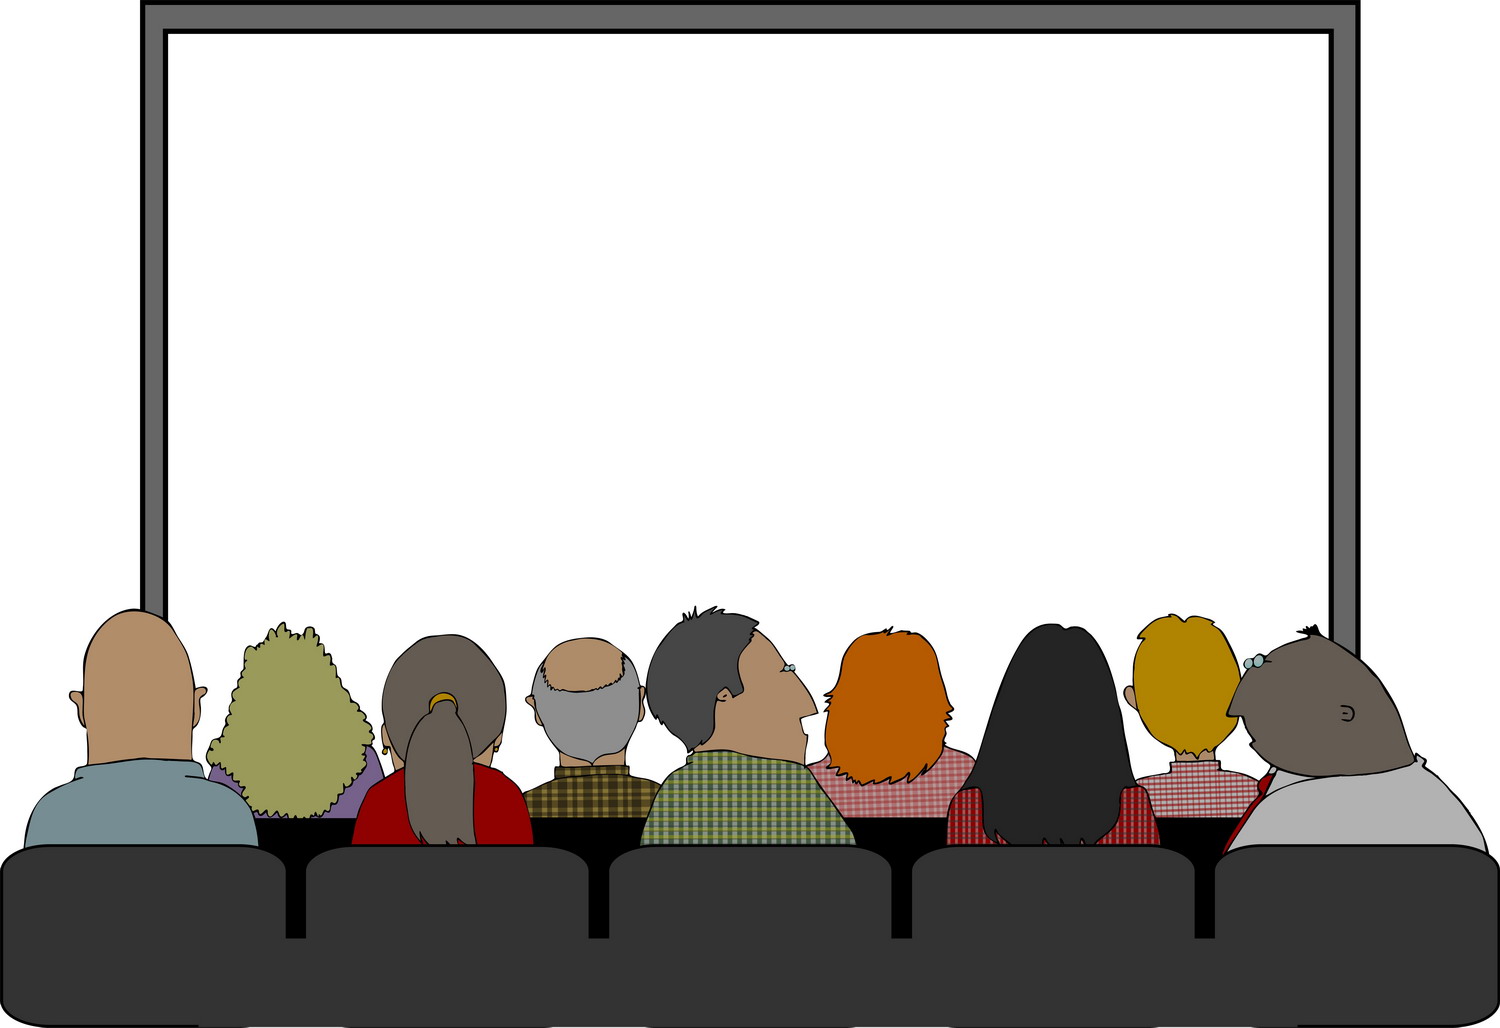 School conference clipart